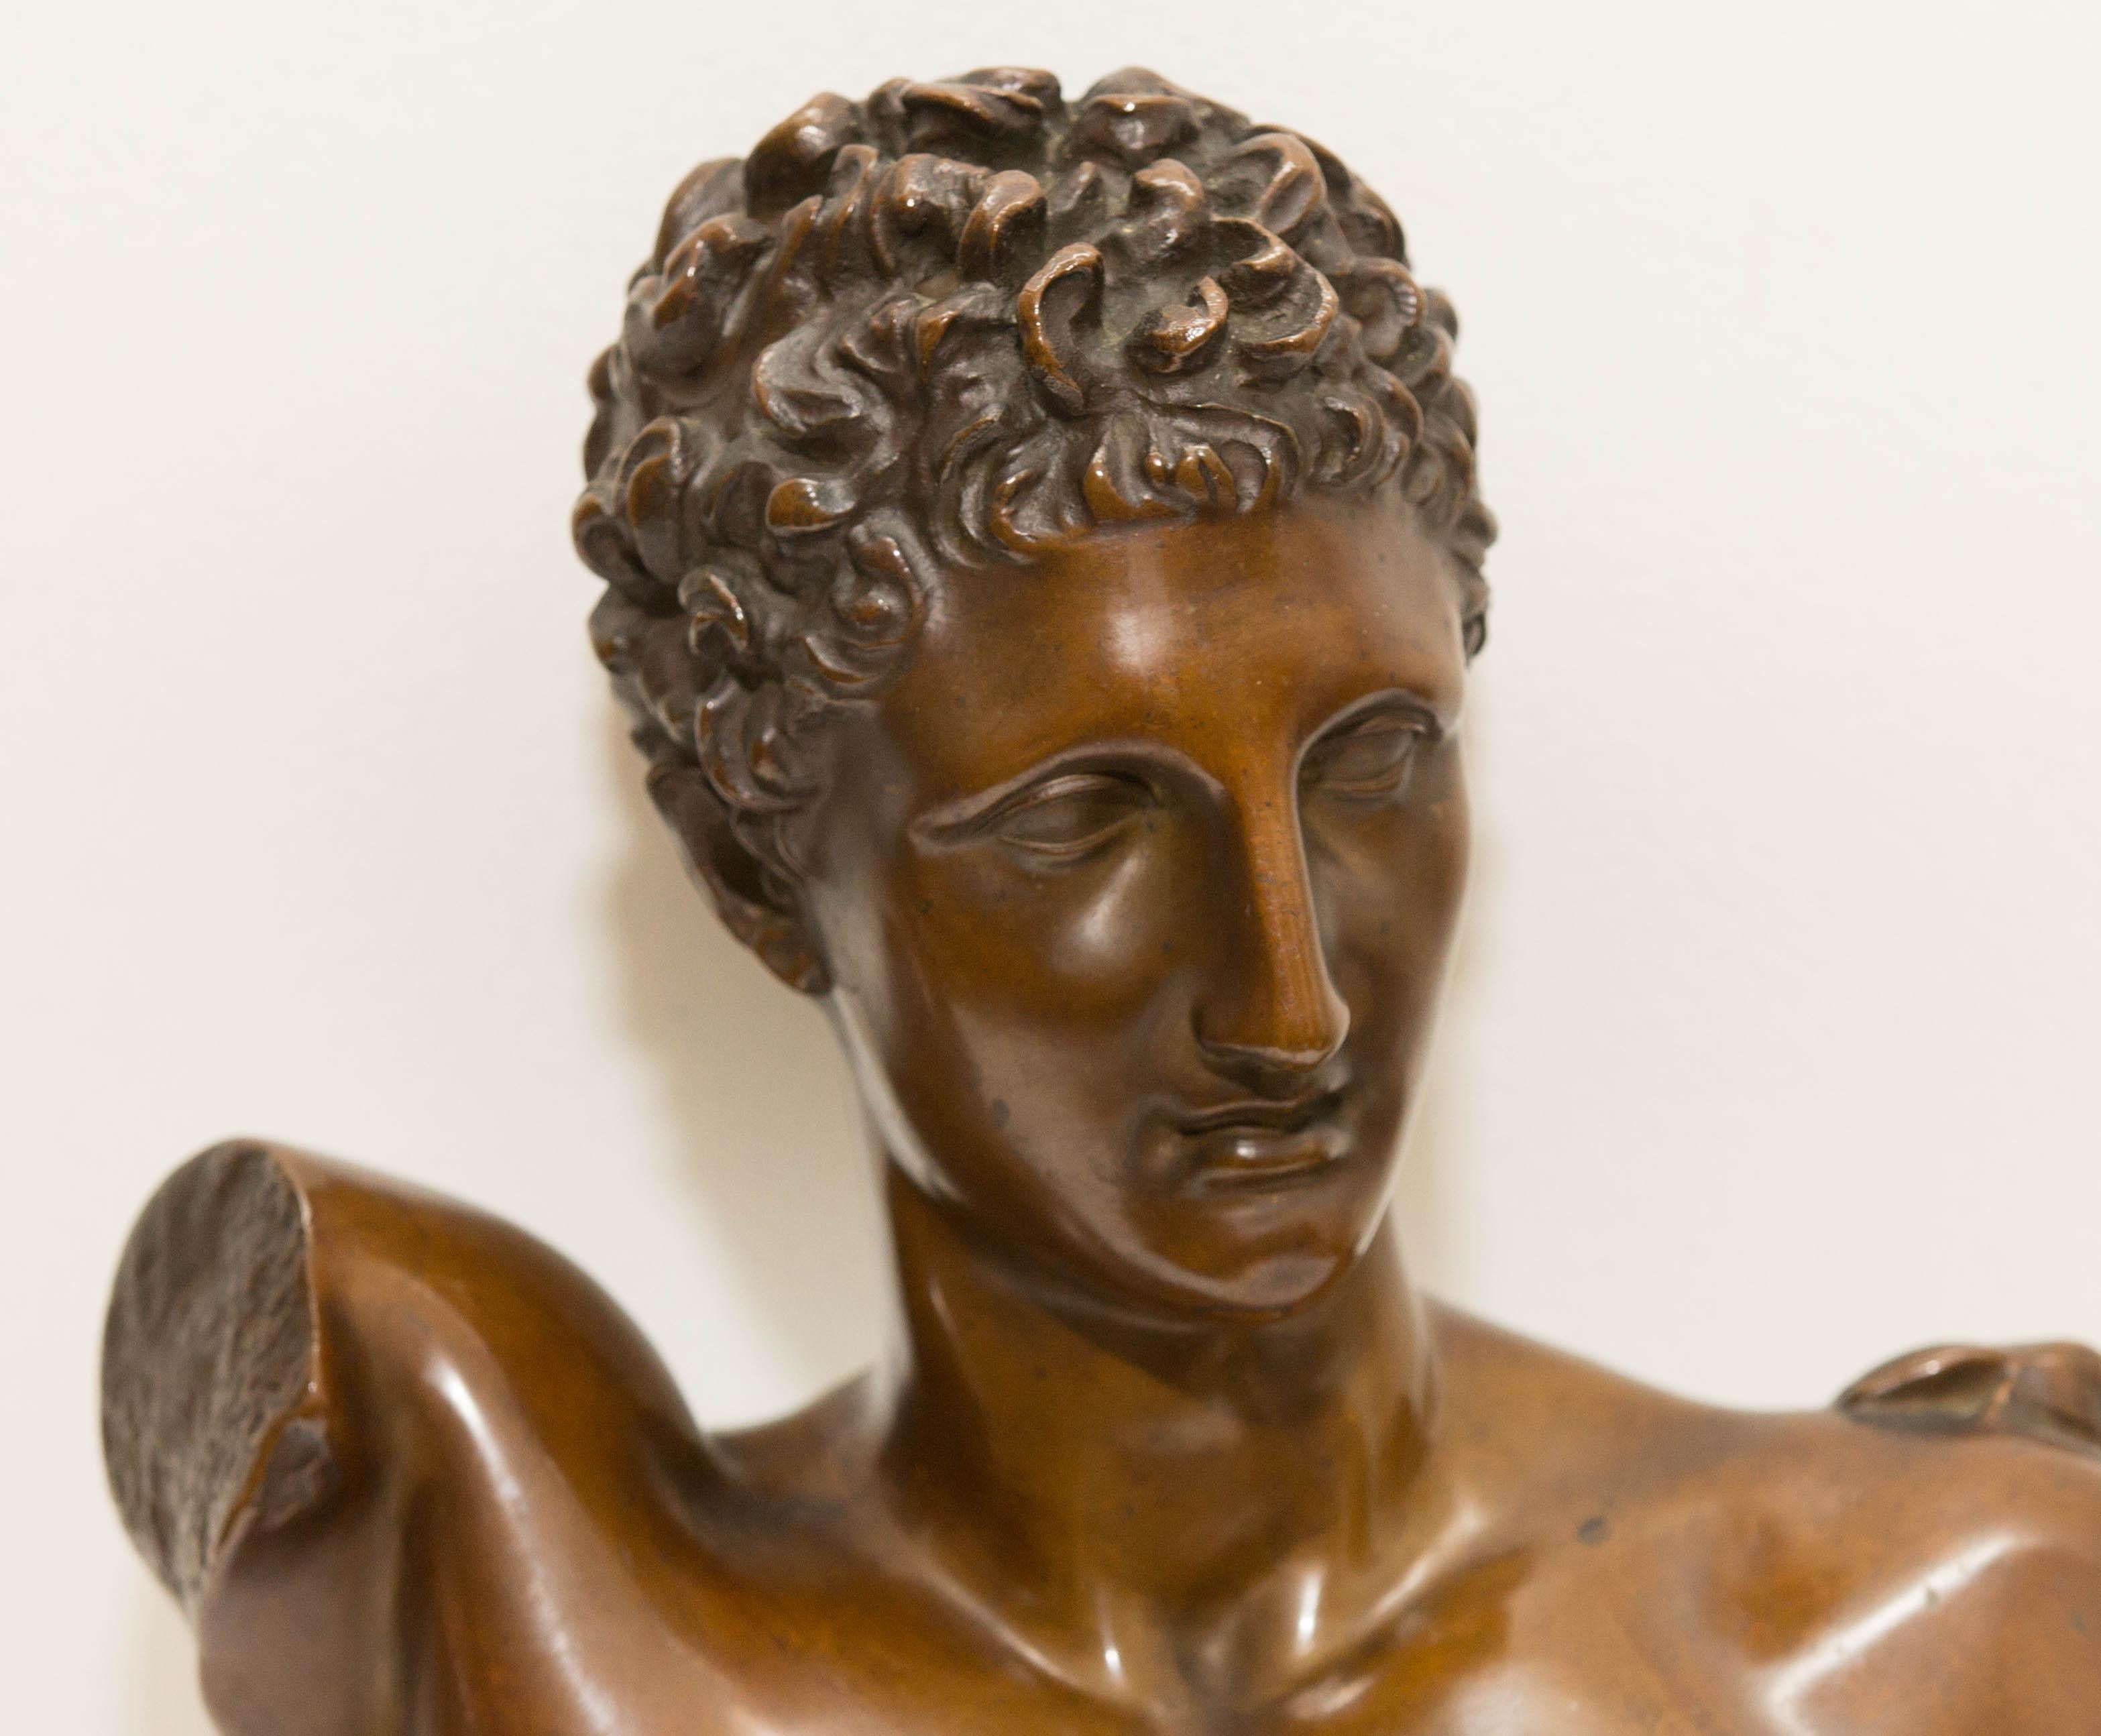 Antique bronze bust of Hermes. Excellent detail and patina.